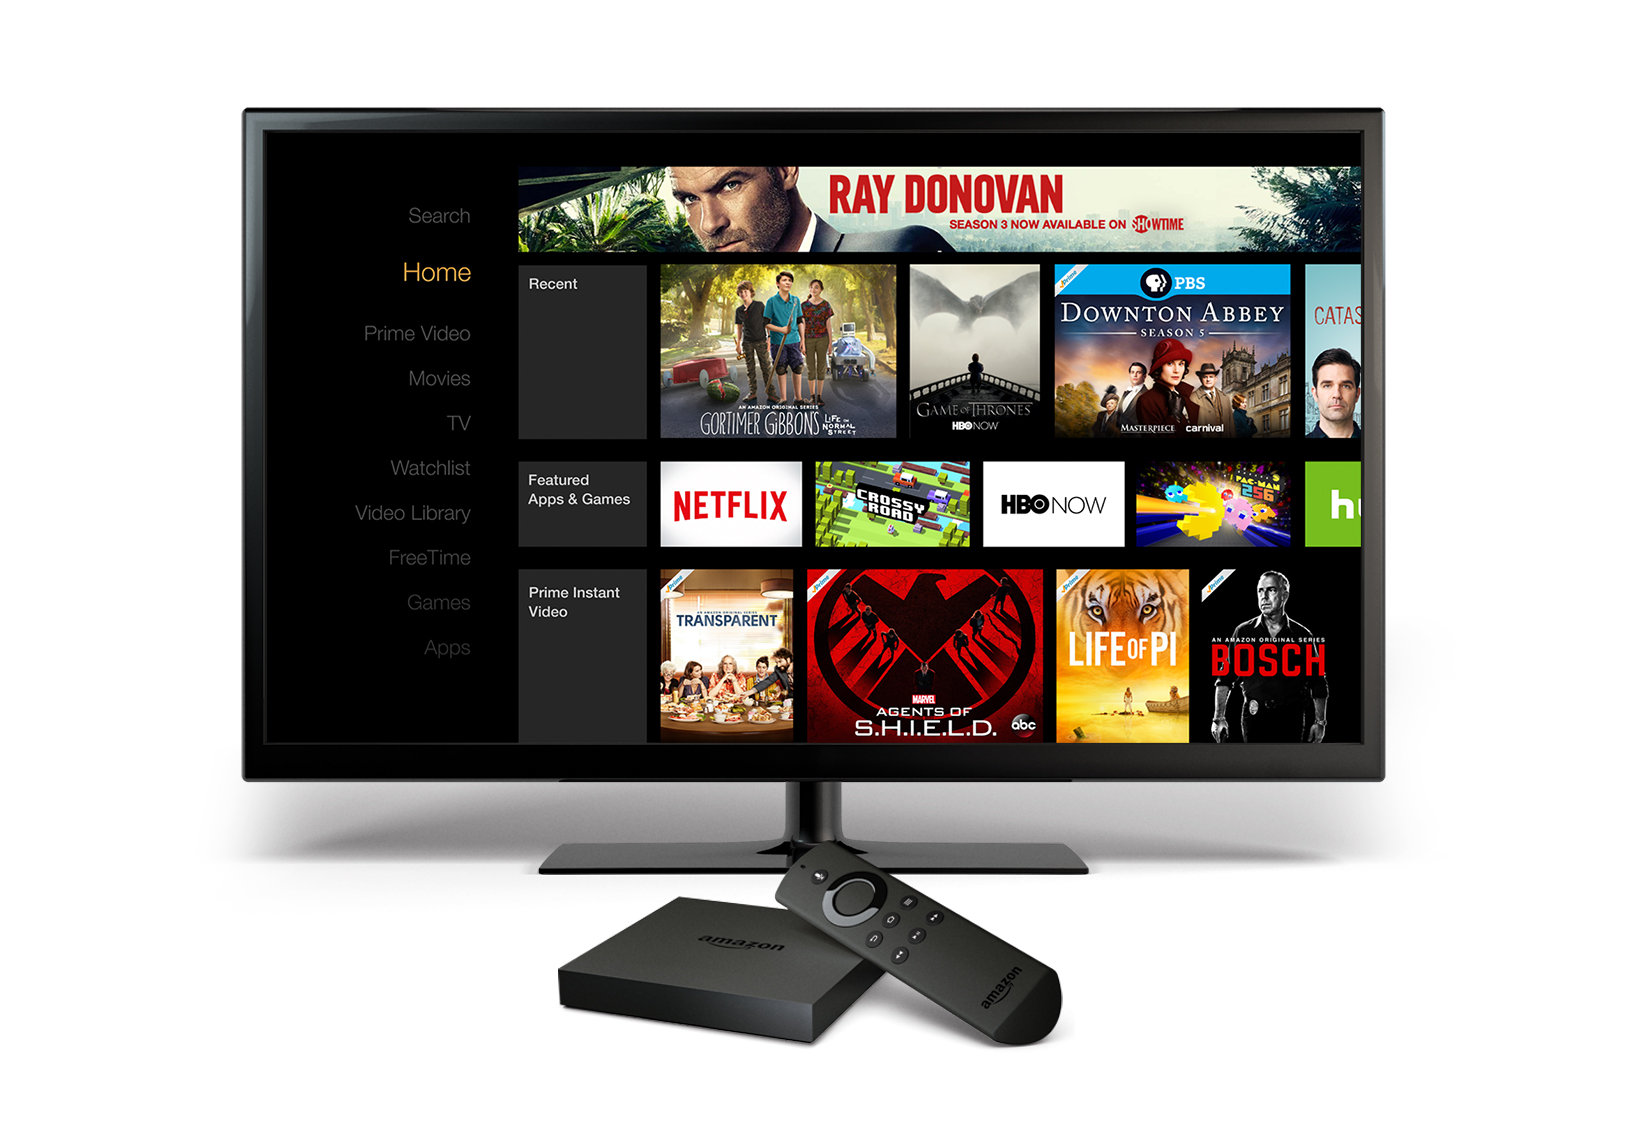 Fire TV Cube - Amazon.com, Inc. Makes a Leap With the Fire TV Cube